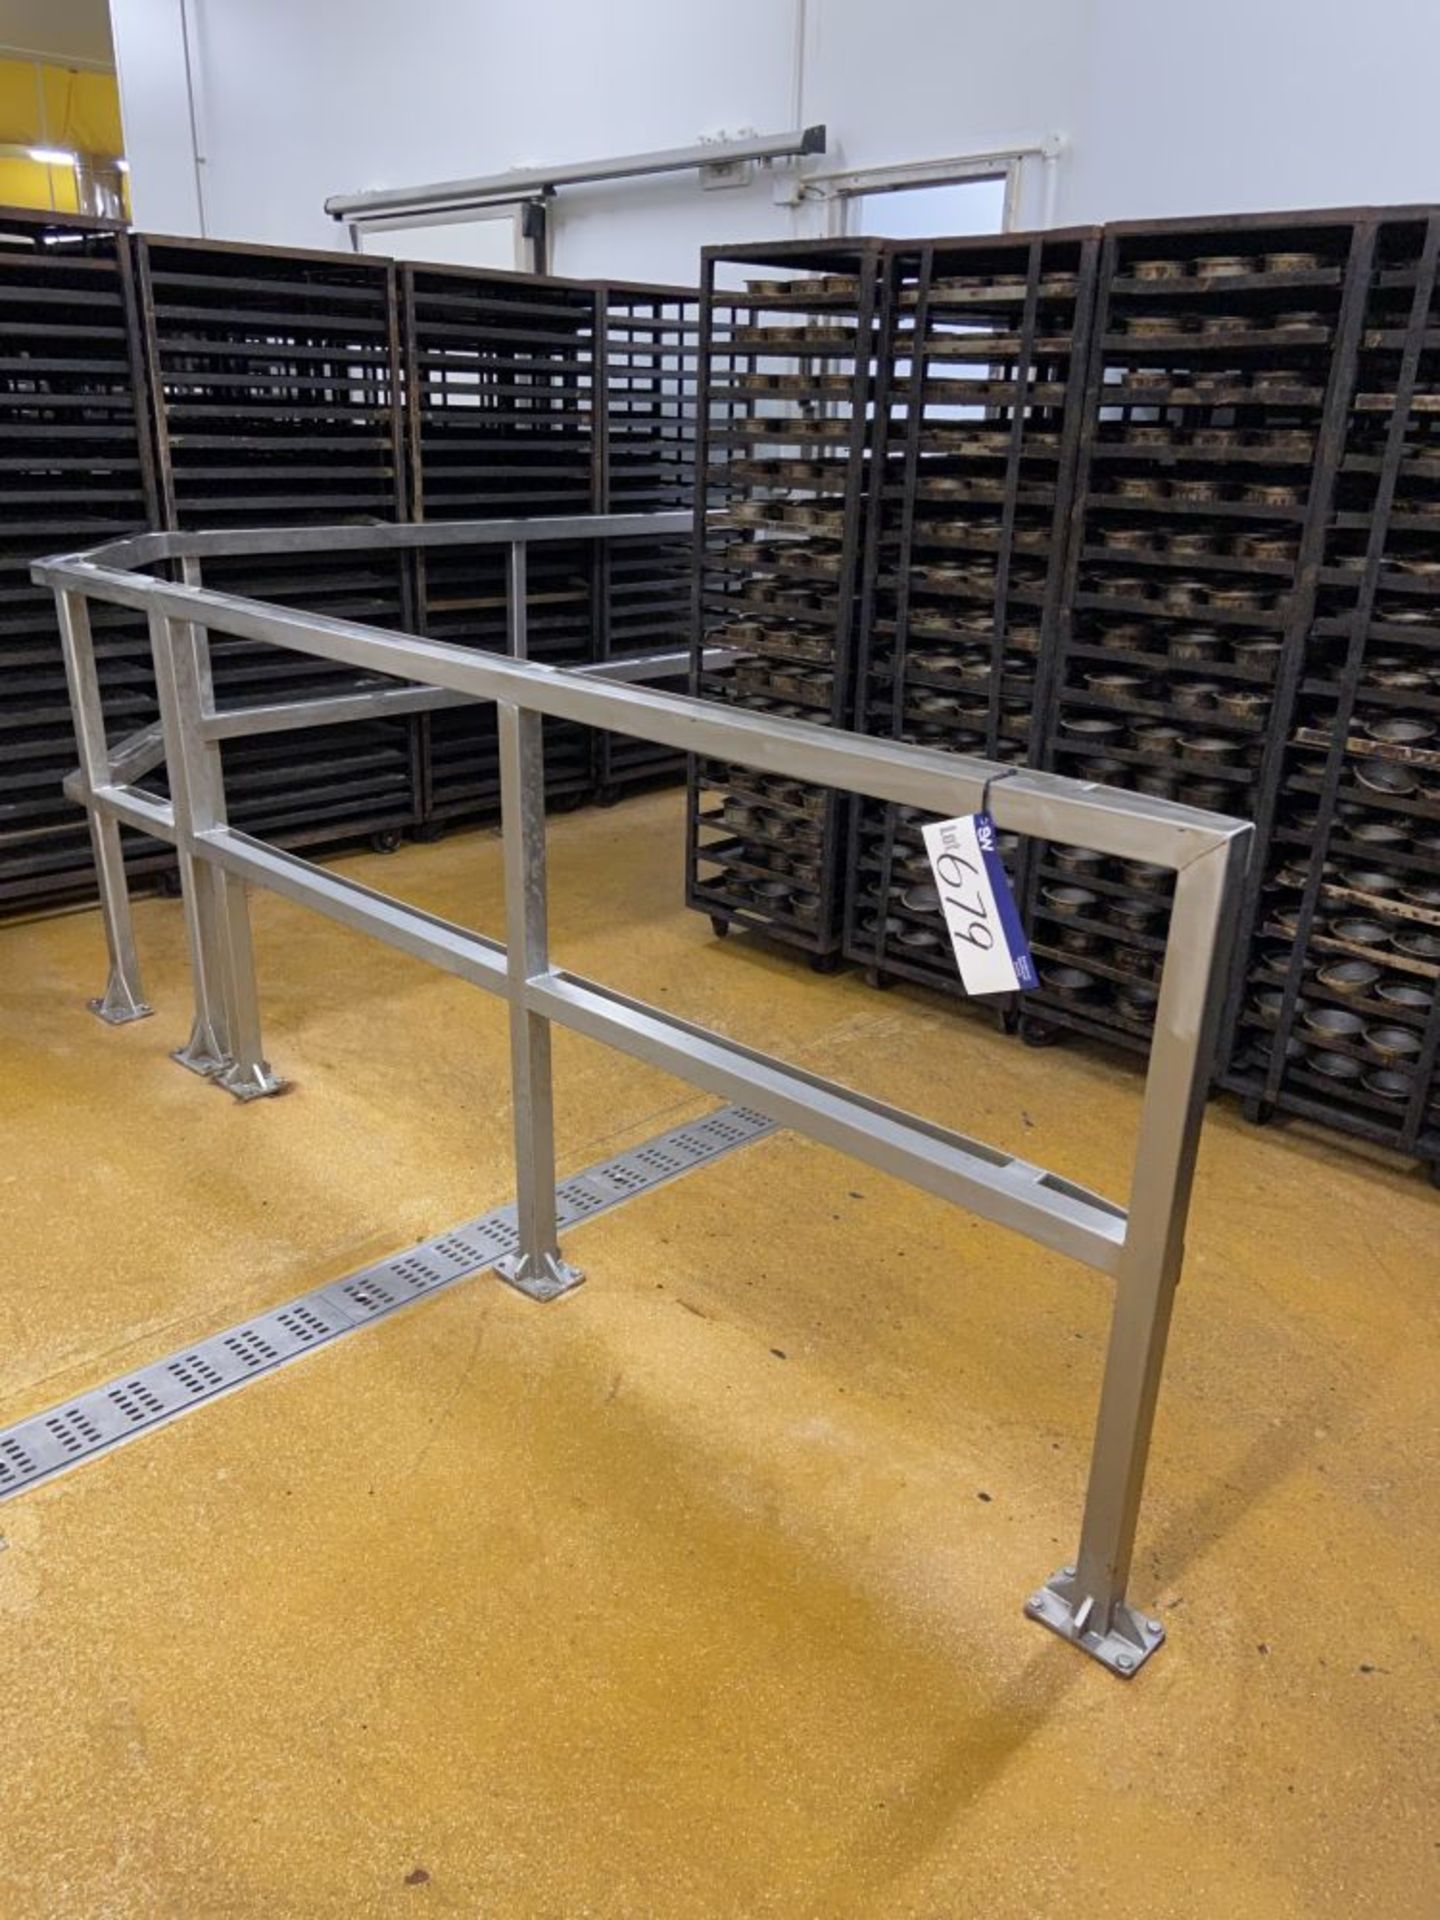 Stainless Steel L-Shaped Rail, approx. 3.25m x 2.75m overallPlease read the following important